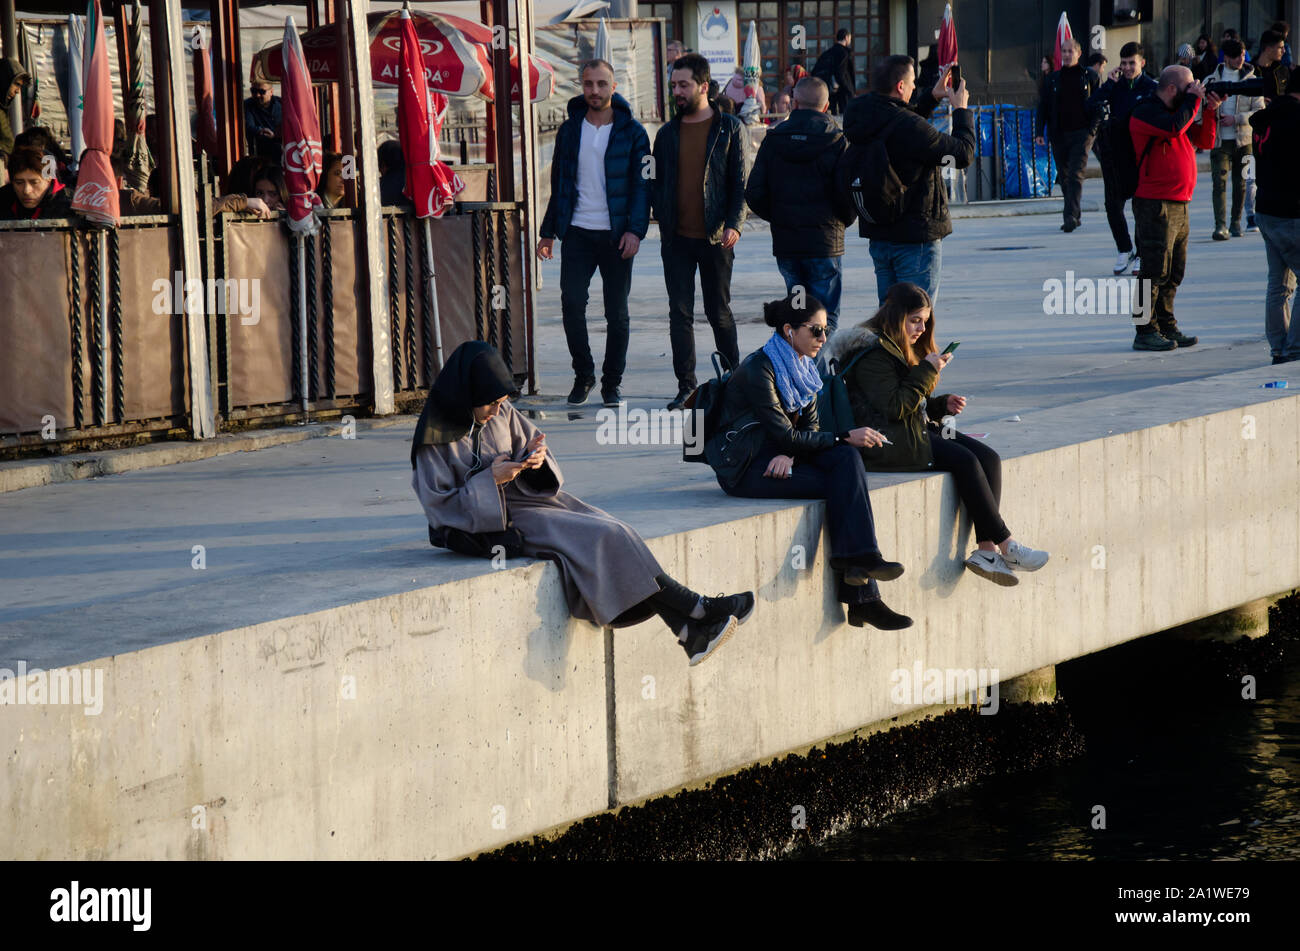 Istanbul, Turkey, March 07,2019: three women sitting and relaxing on stone fence looking at phones, diversity people in crowded place Bosphorus, Stock Photo